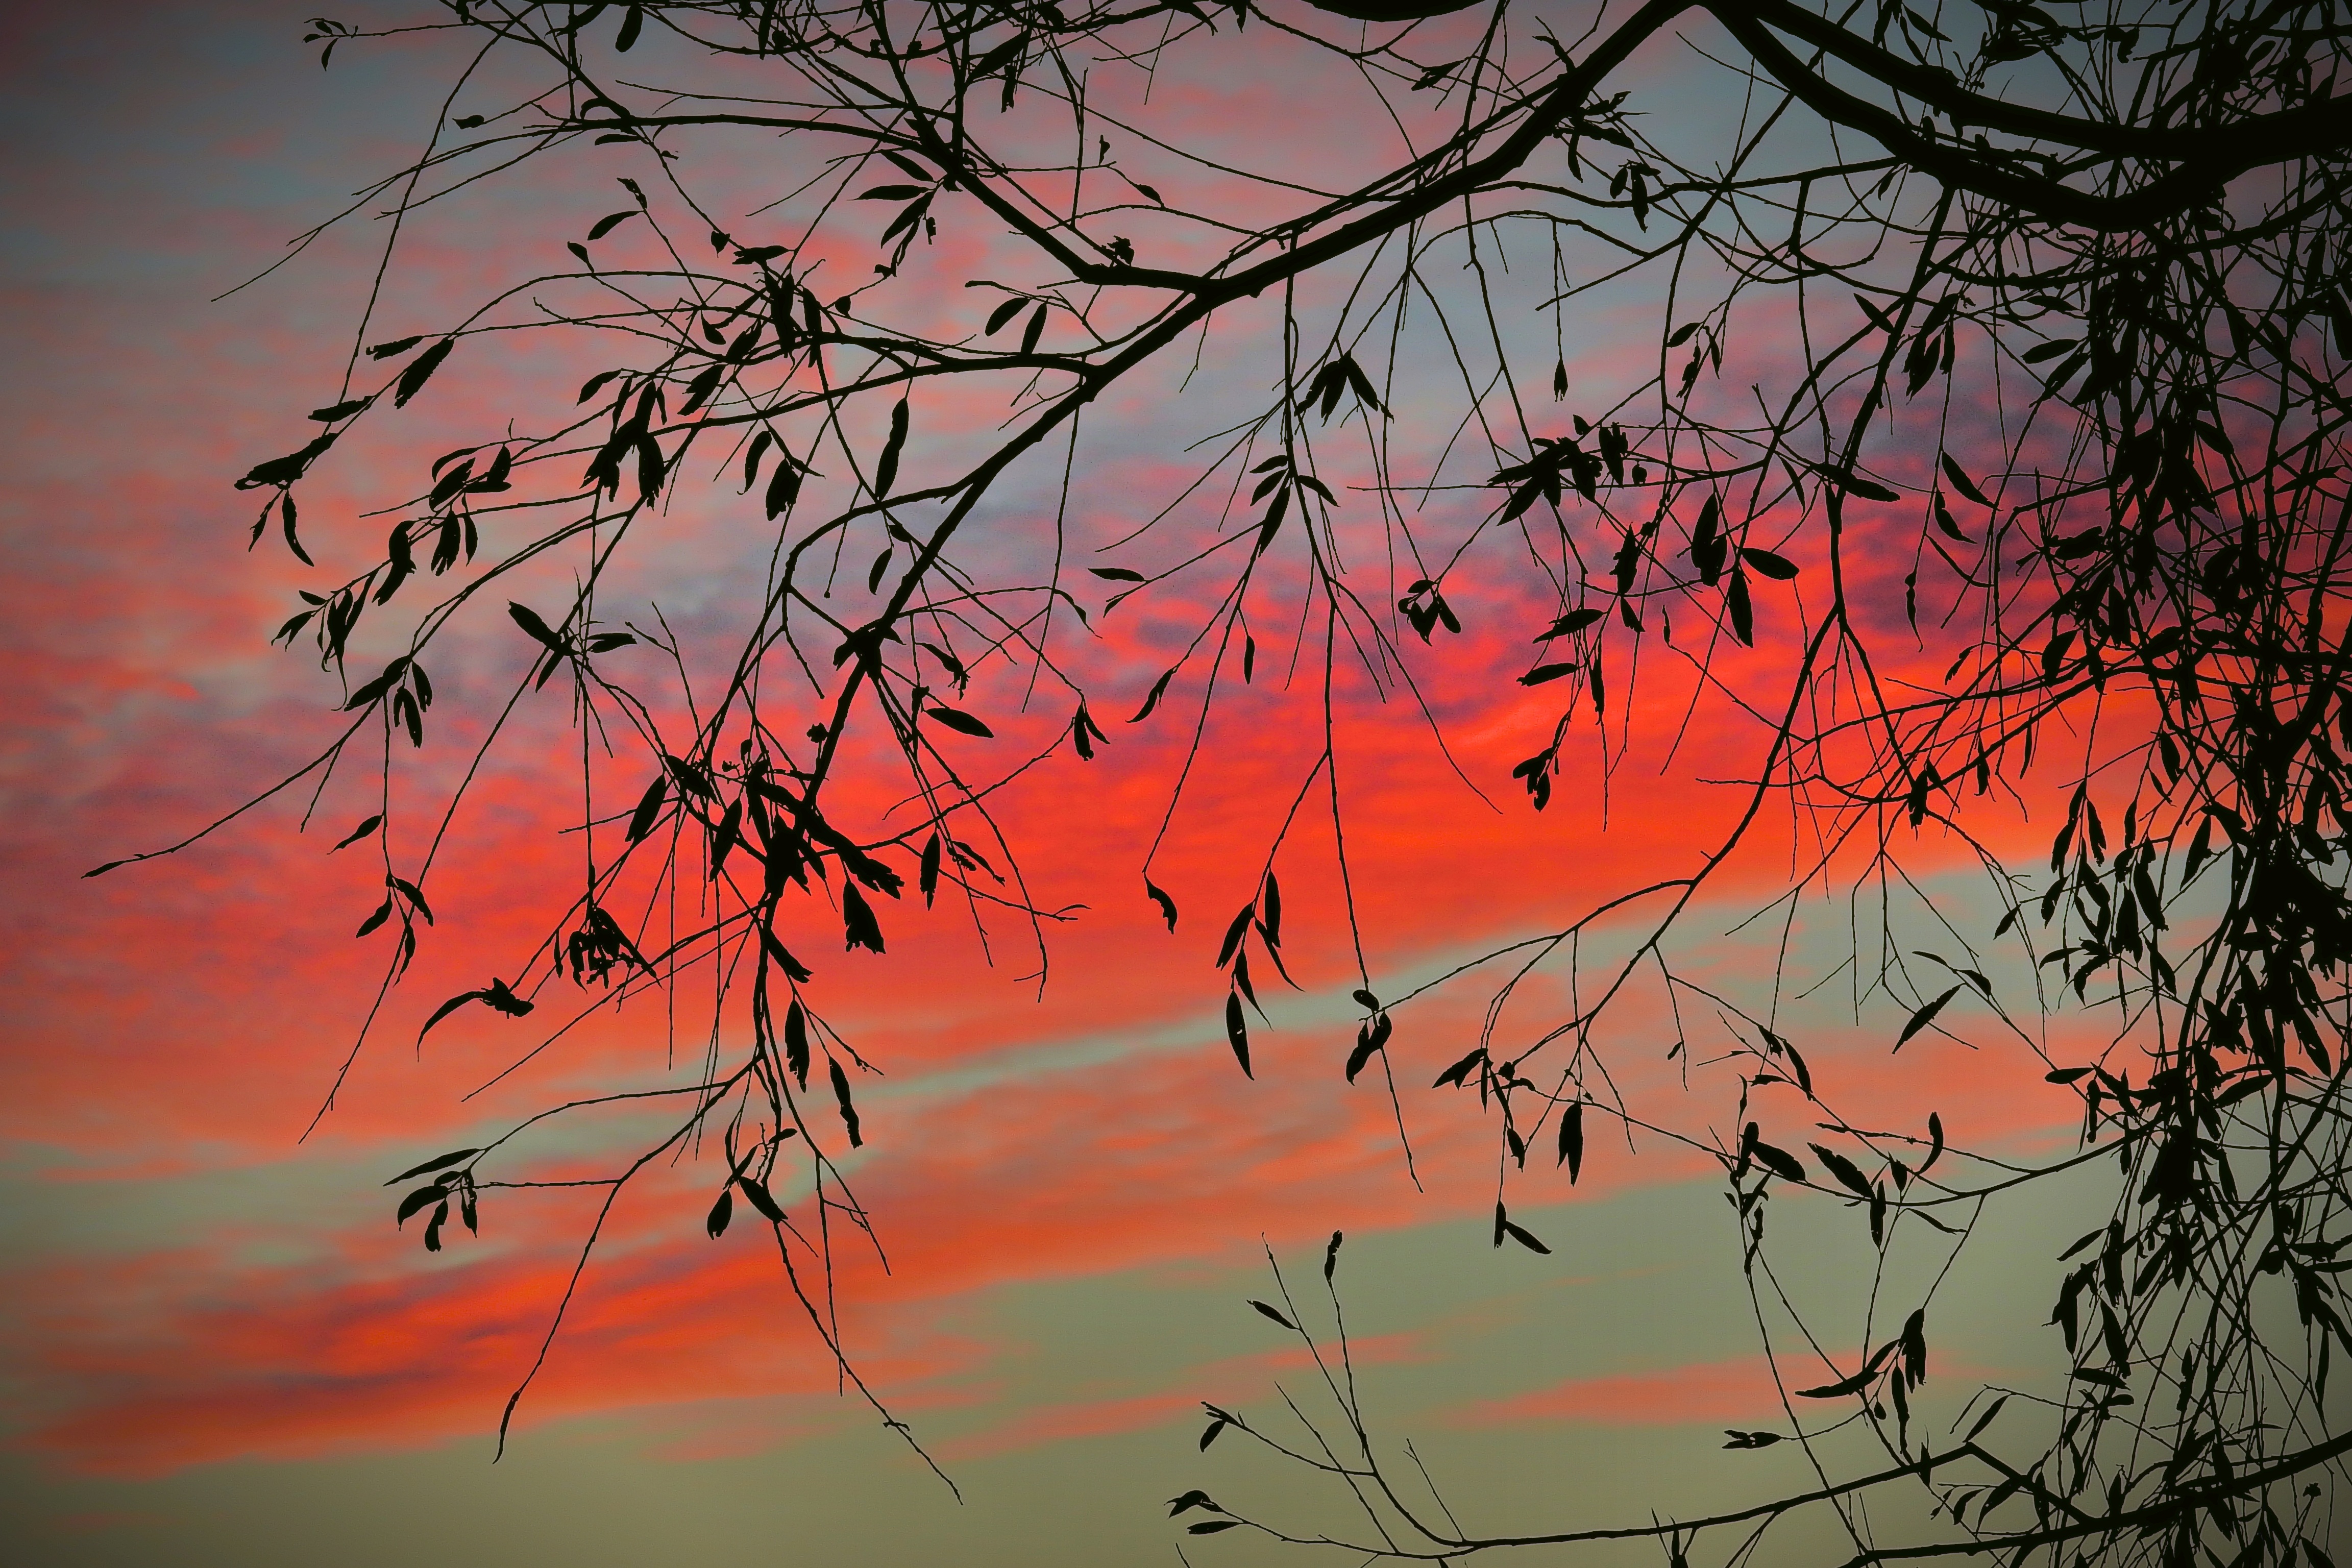 leaves, tree, nature, sunset, sky, twilight, clouds, wood, branch, dusk